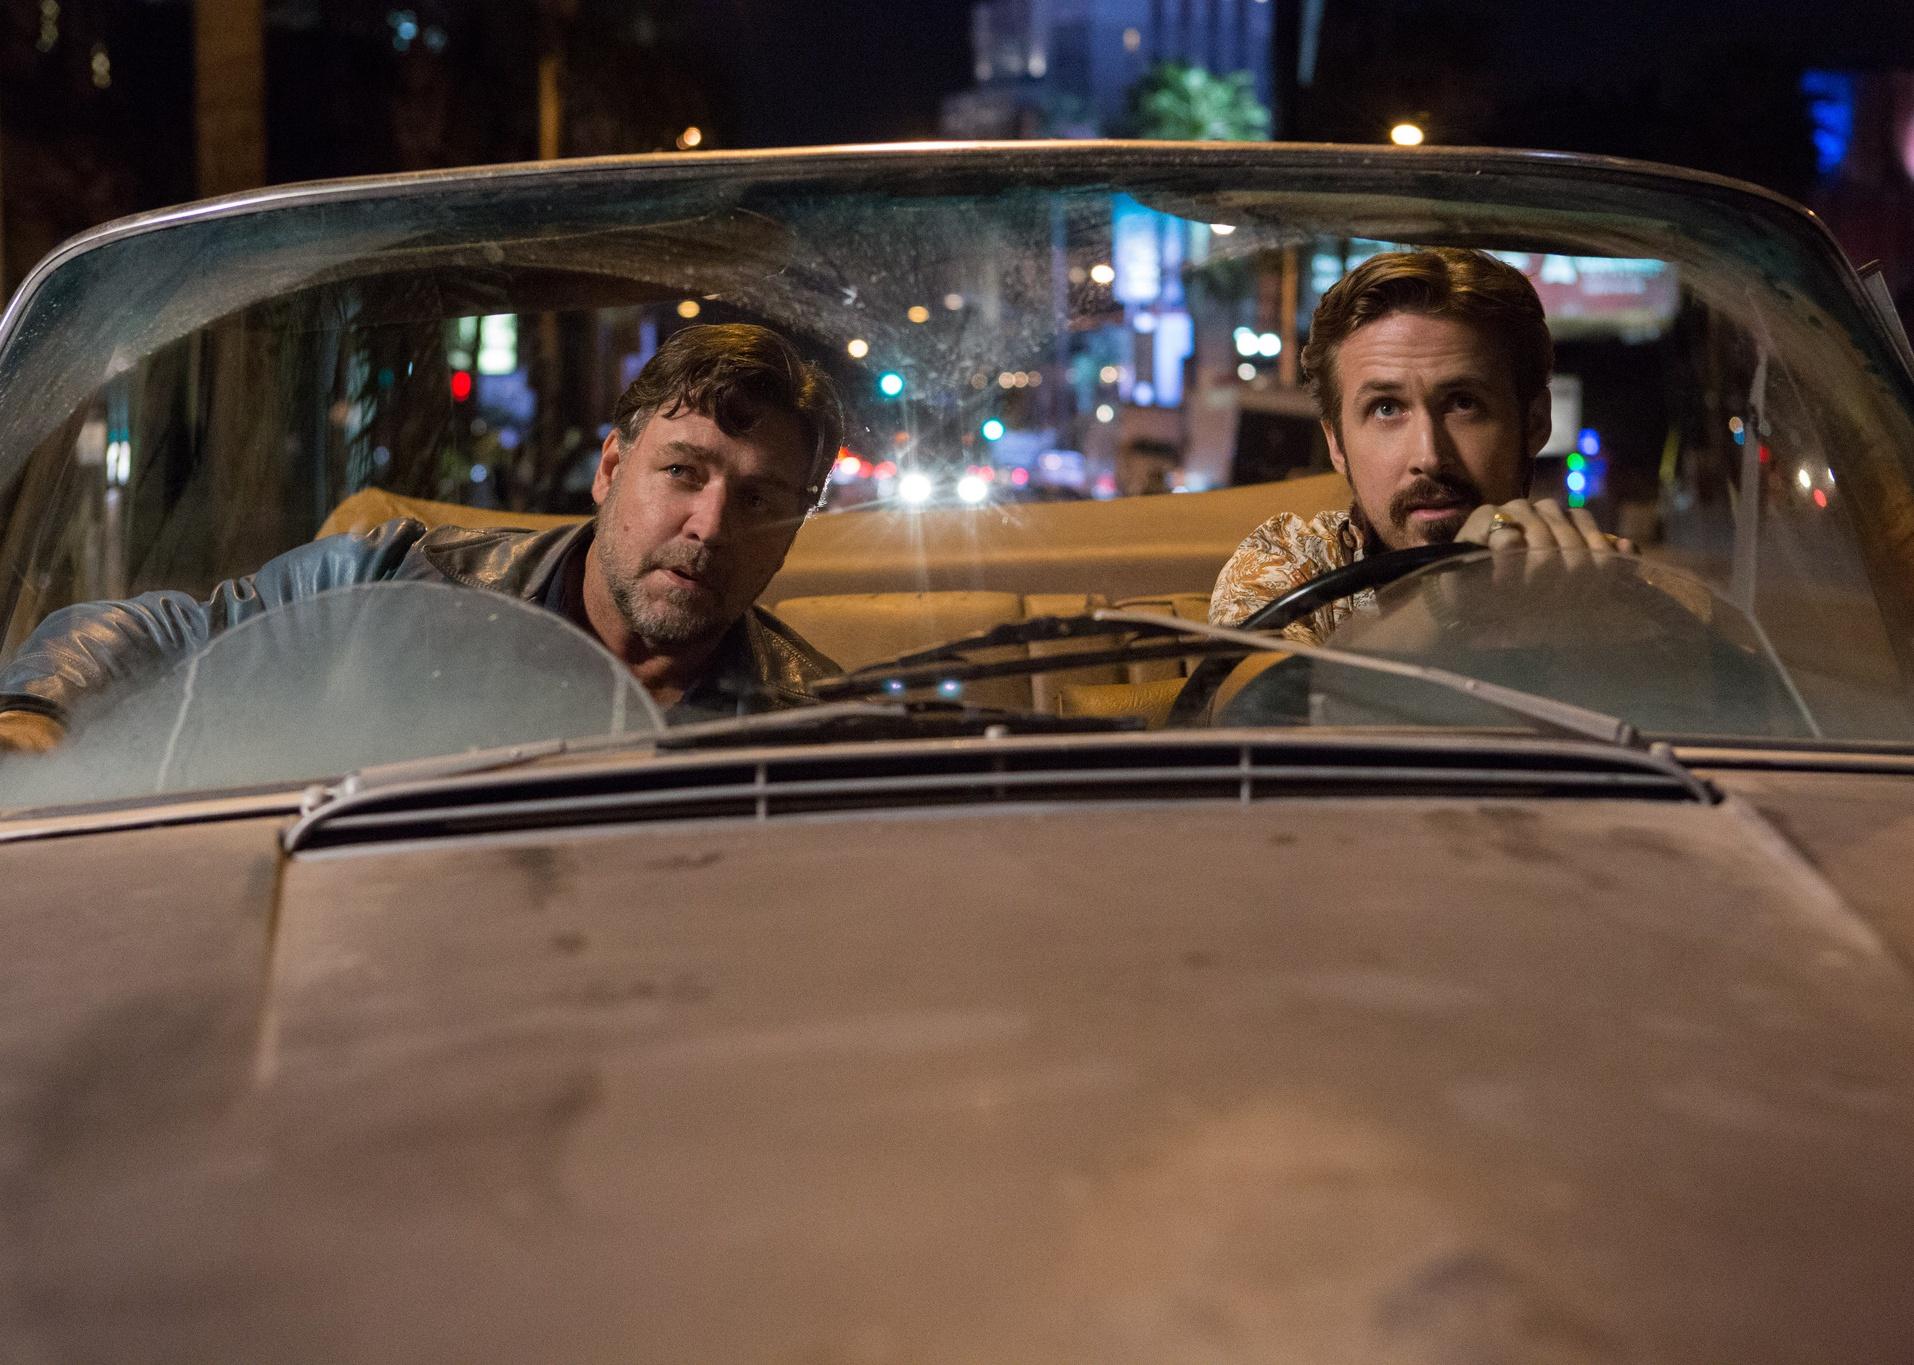 Russell Crowe and Ryan Gosling in a convertible at night.